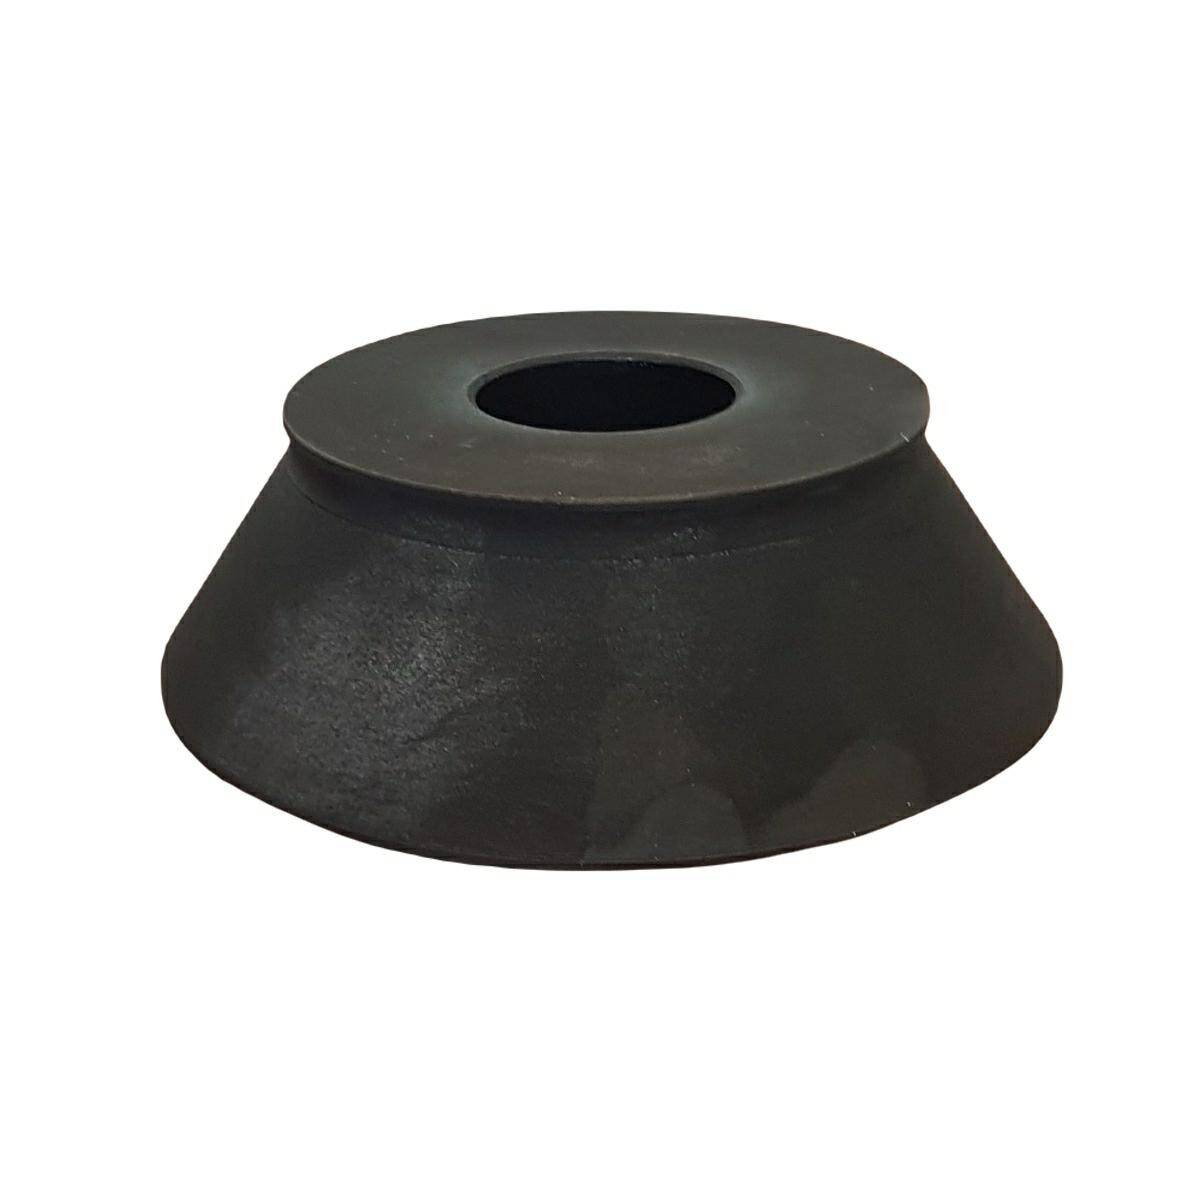 Cone set 36mm AT 94-137mm (3M1054-38/1)